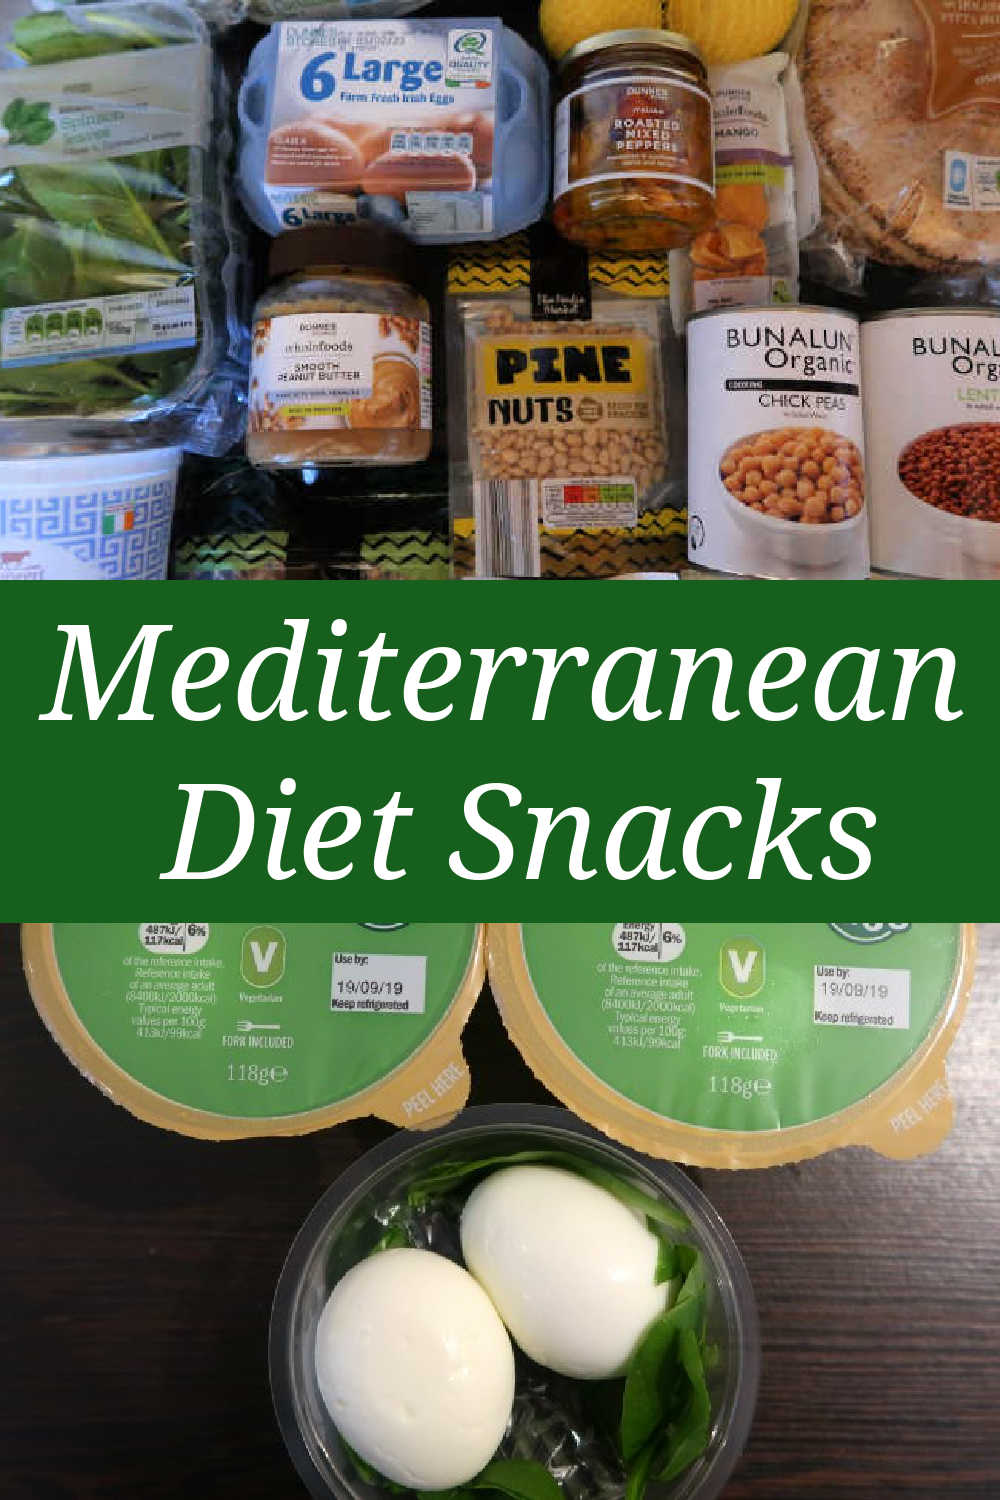 Mediterranean Snack Ideas - the best delicious foods for easy snacks that you can include in a Mediterranean Diet.